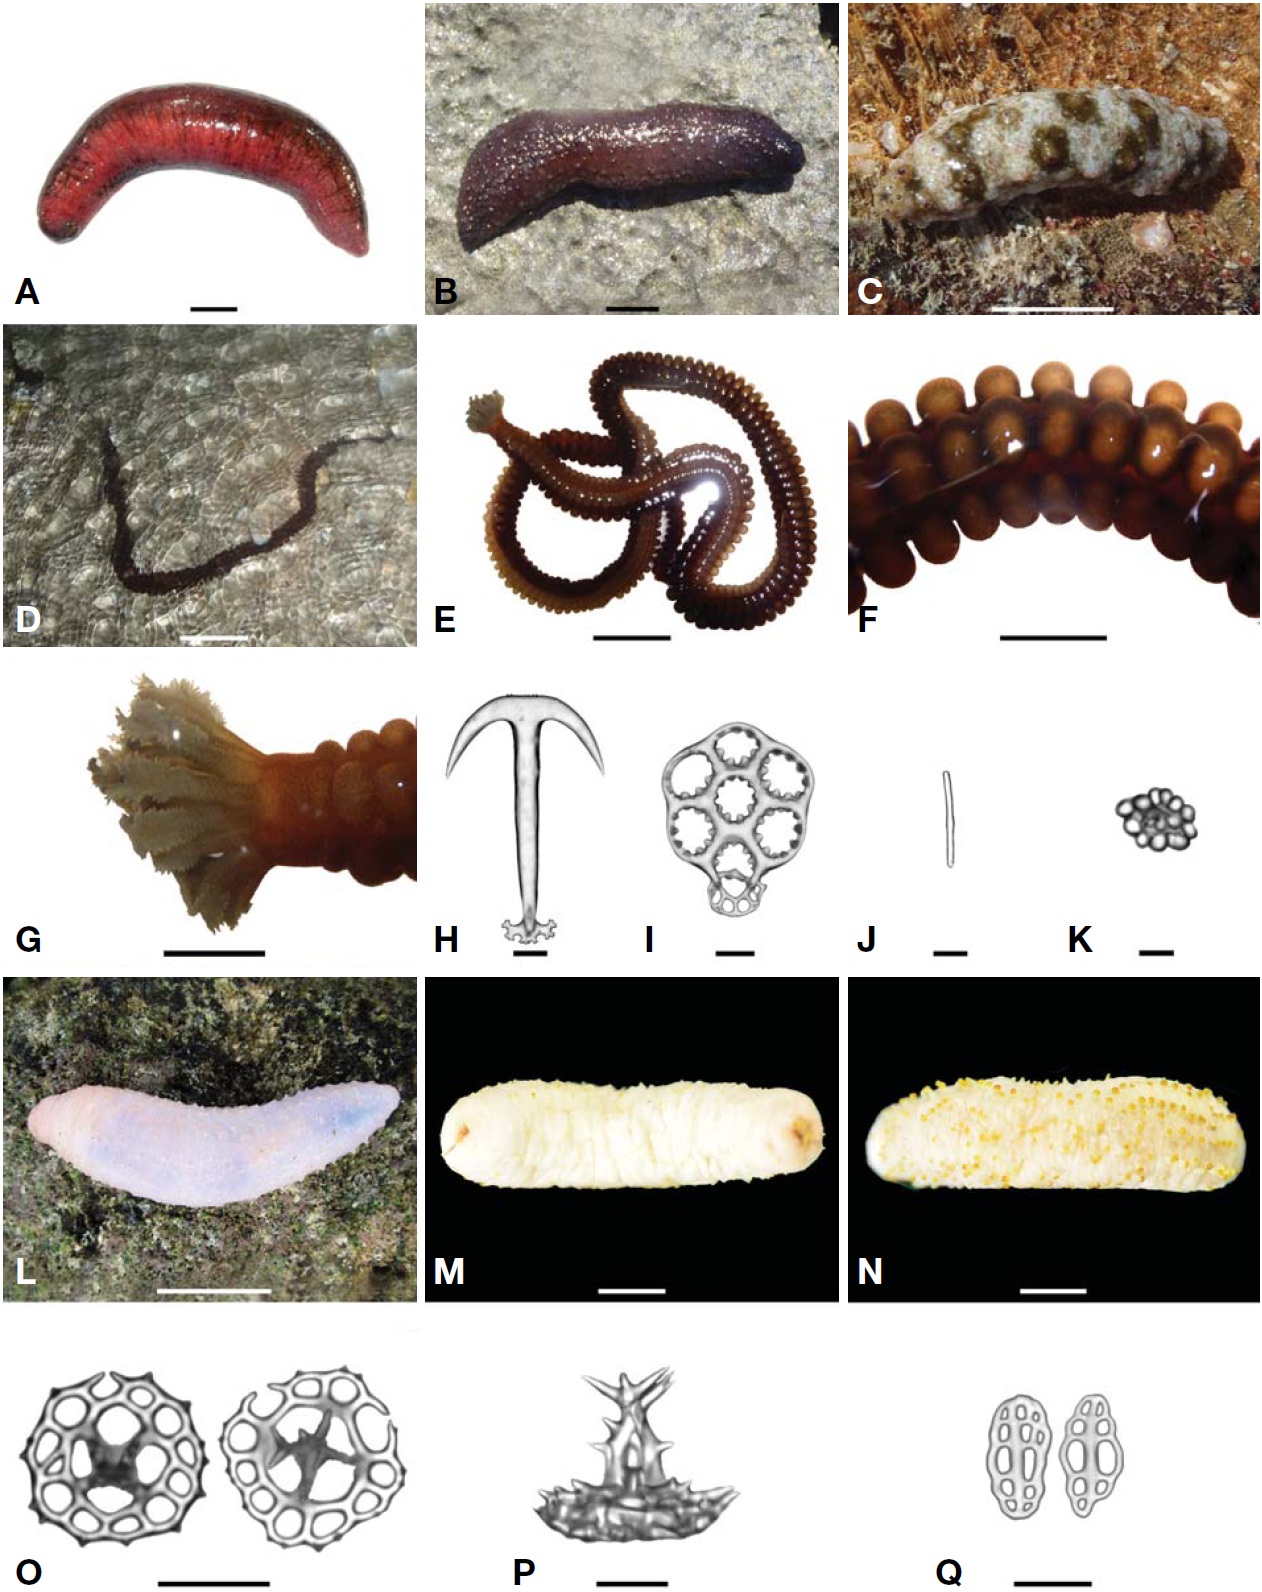 Holothuria (Halodeima) edulis (A), H. (Mertensiothuria) leucospilota (B), Stichopus horrens (C), Opheodesoma clarki (D-K), and Labidodemas rugosum (L-Q). A-F, L, Living status; F, Body; G, Tentacles; H, Anchor in body wall; I, Anchor plate in body wall; J, Rod in tentacle; K, Knobbed button in tentacle; M, Dorsal side; N, Ventral side; O, Tables in body wall; P, Lateral view of table in body wall; Q, Buttons in tubefeet. Scale bars: A-C, F, G=2 cm, D=10 cm, E, L=5 cm, H, I, Q=50 μm, J=20 μm, K=10 μm, M, N=5 mm, O=0.5 mm, P=250 μm.